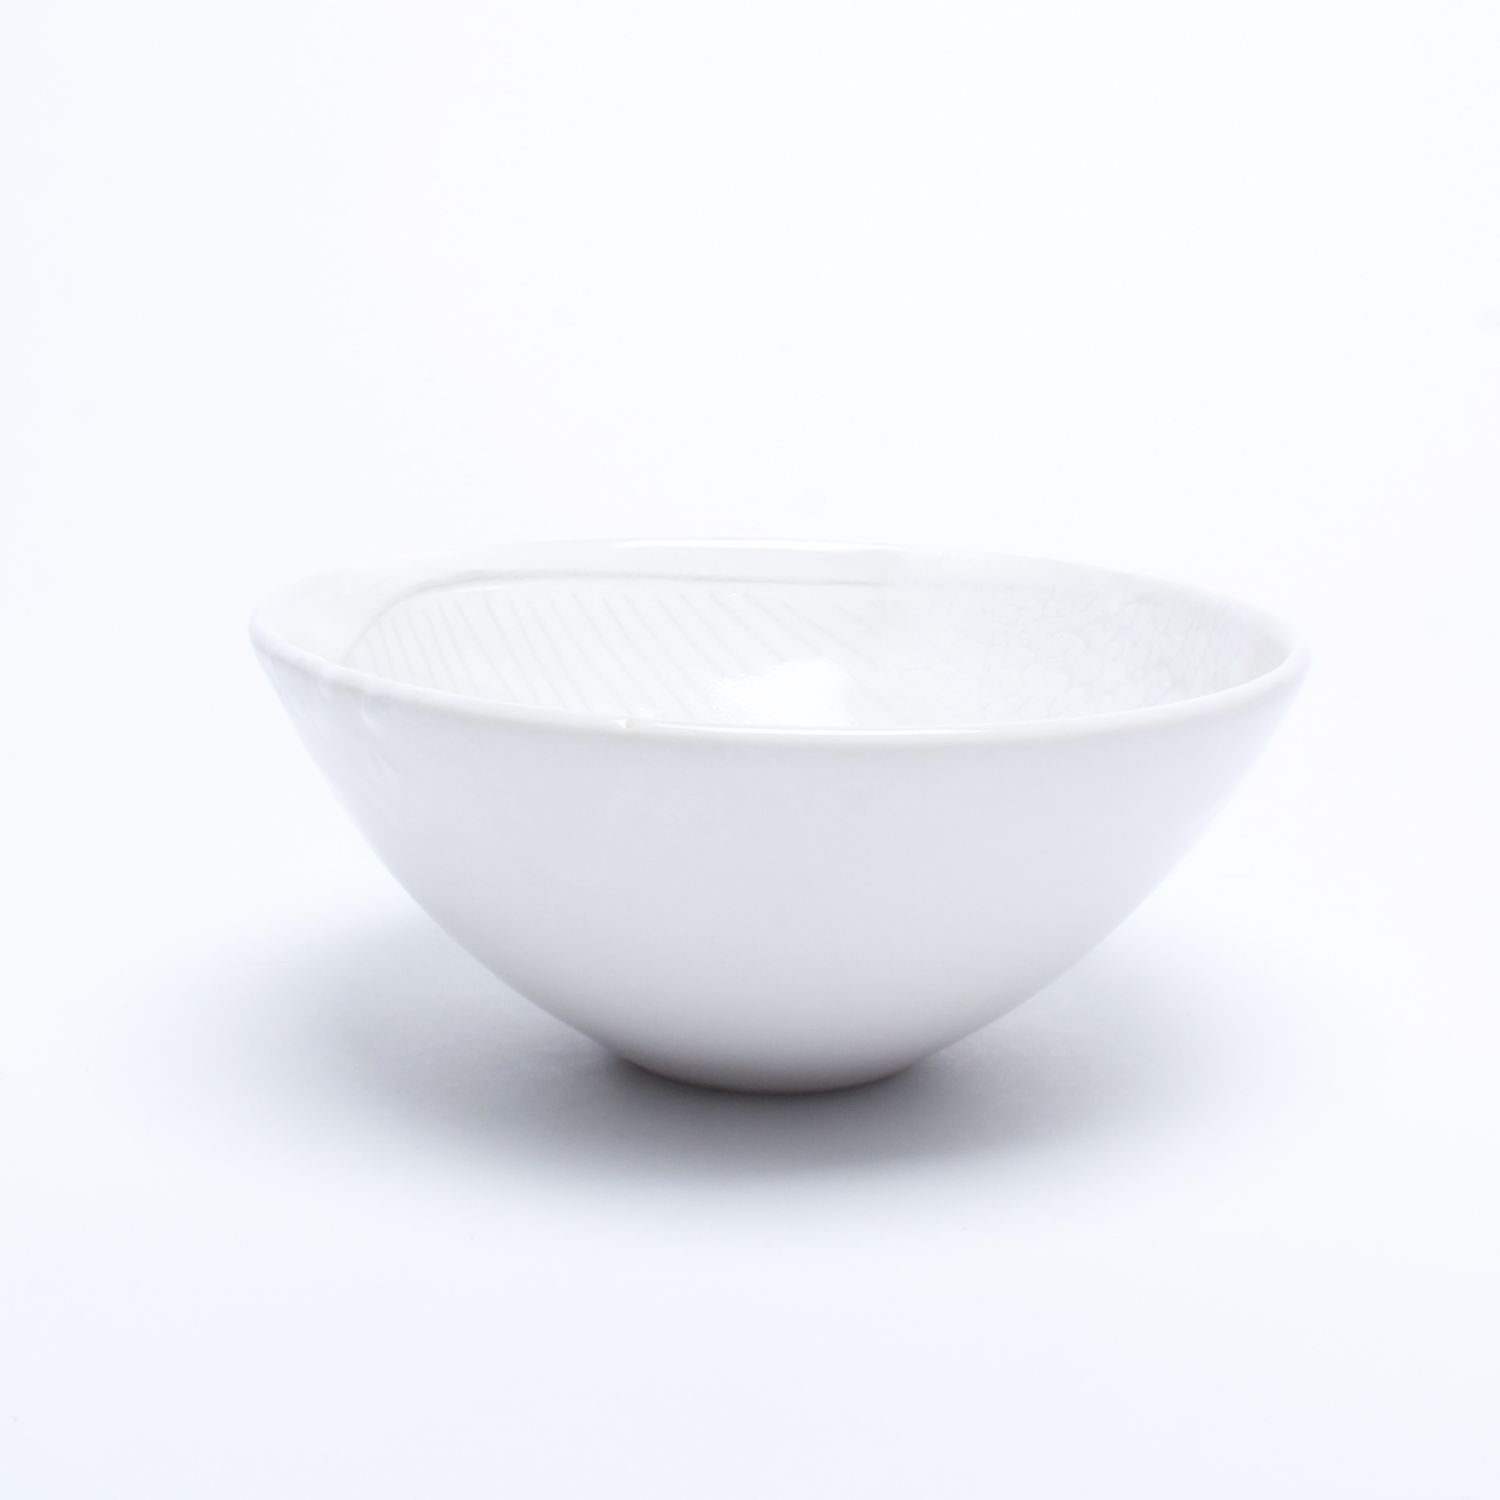 Jane Wilson: Small Bowl Product Image 4 of 4